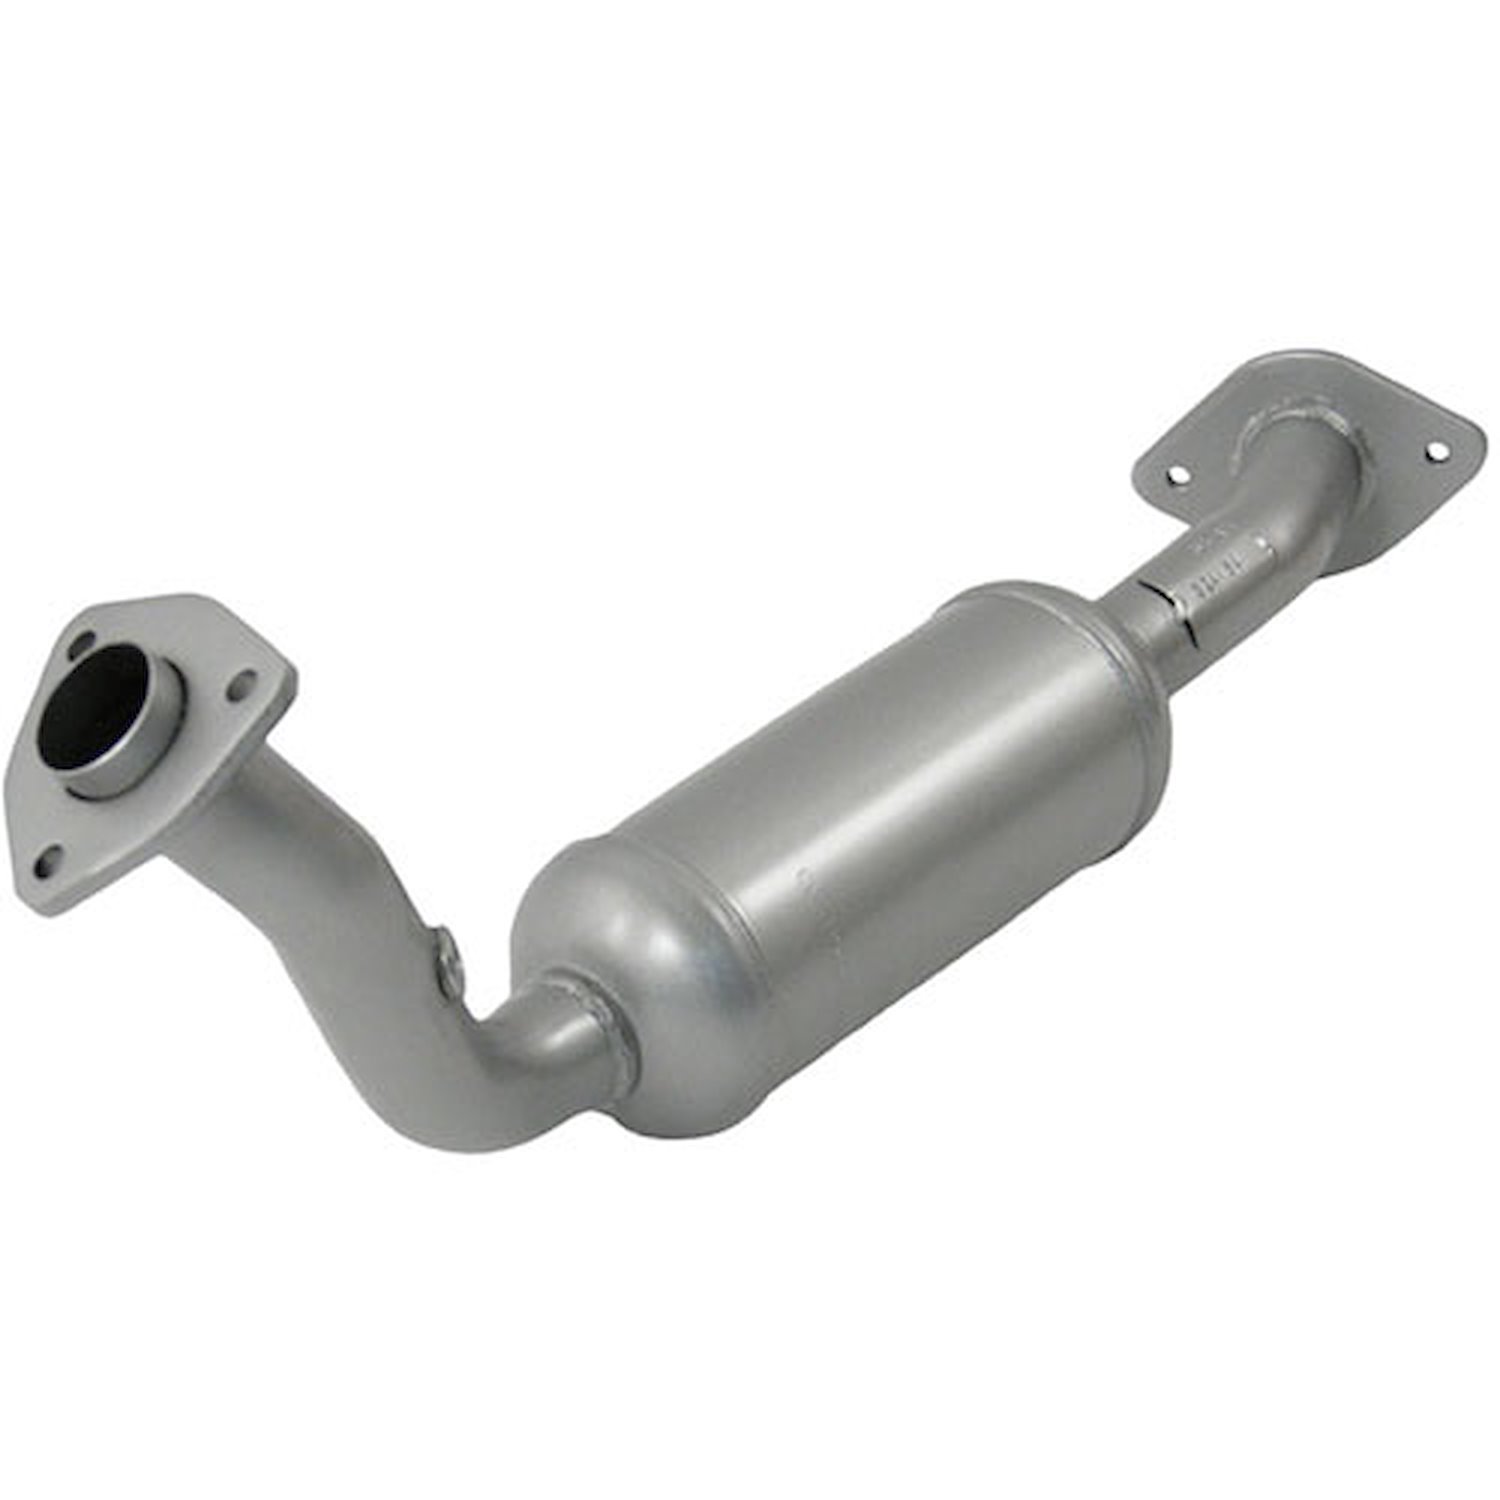 Pacesetter Direct-Fit Catalytic Converter. Direct Replacement of OEM, Stainless Steel Construction, Low Restriction Design